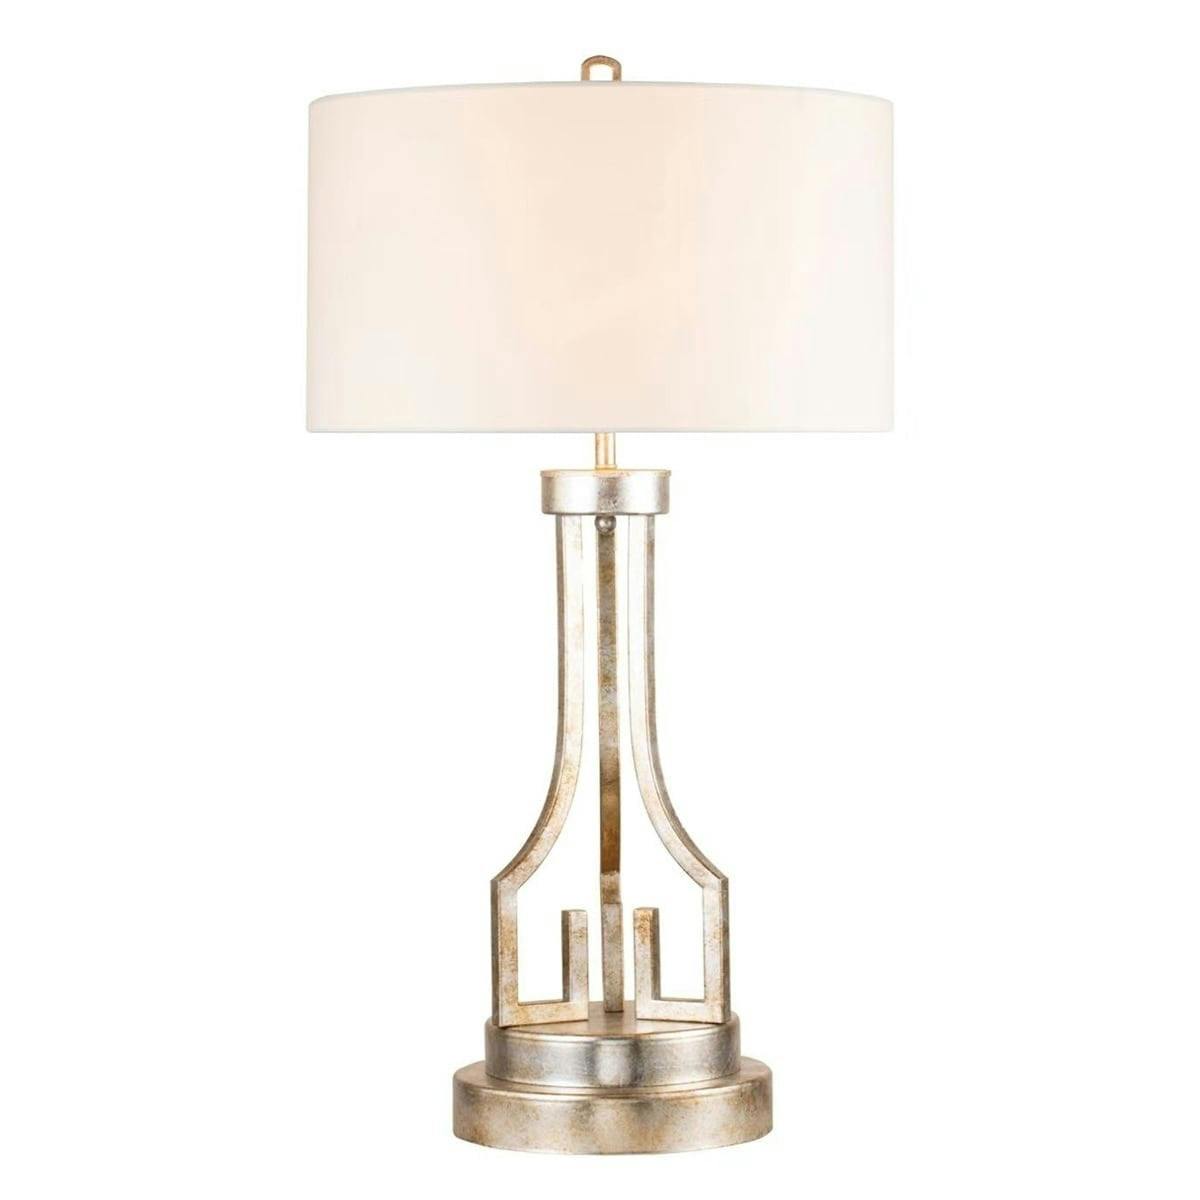 Elegant Antique Silver Buffet Lamp with White Linen Shade